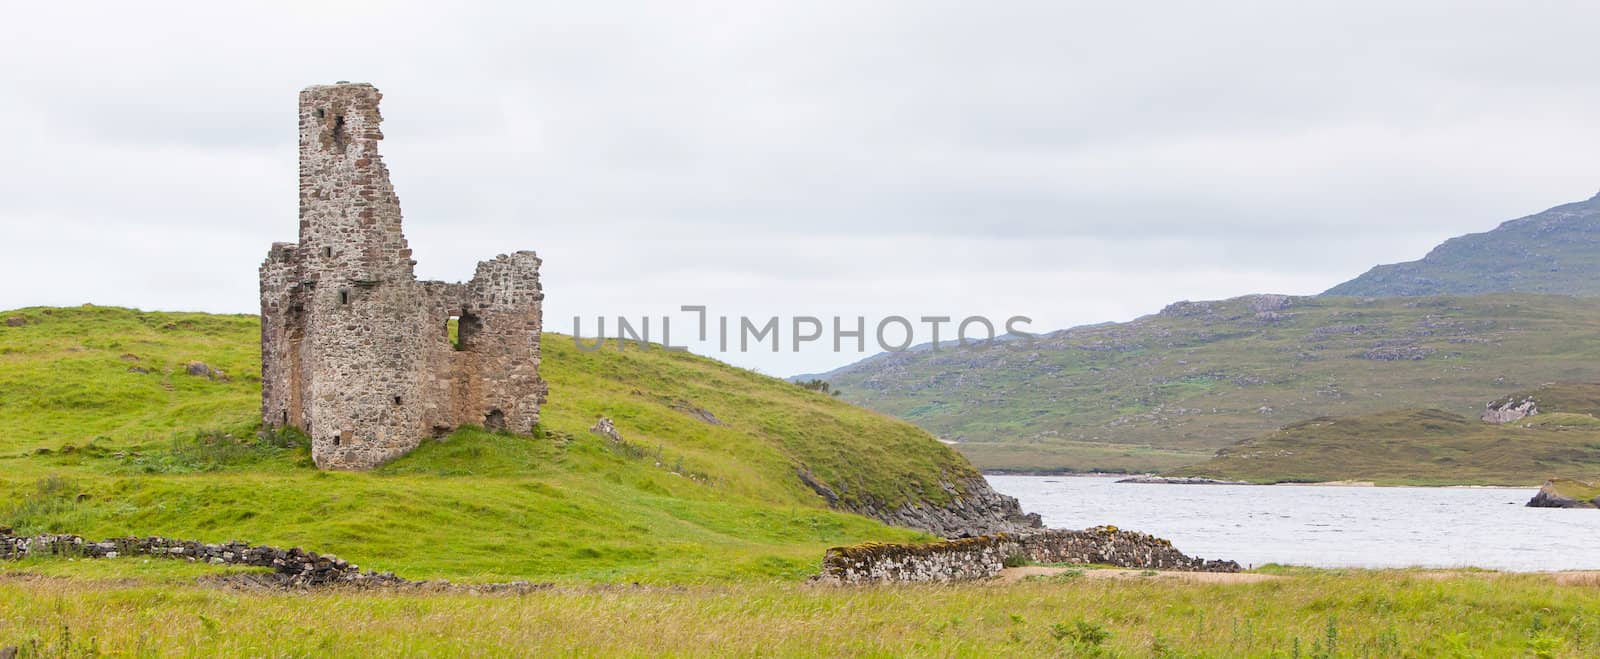 Ruins of an old castle in Scotland